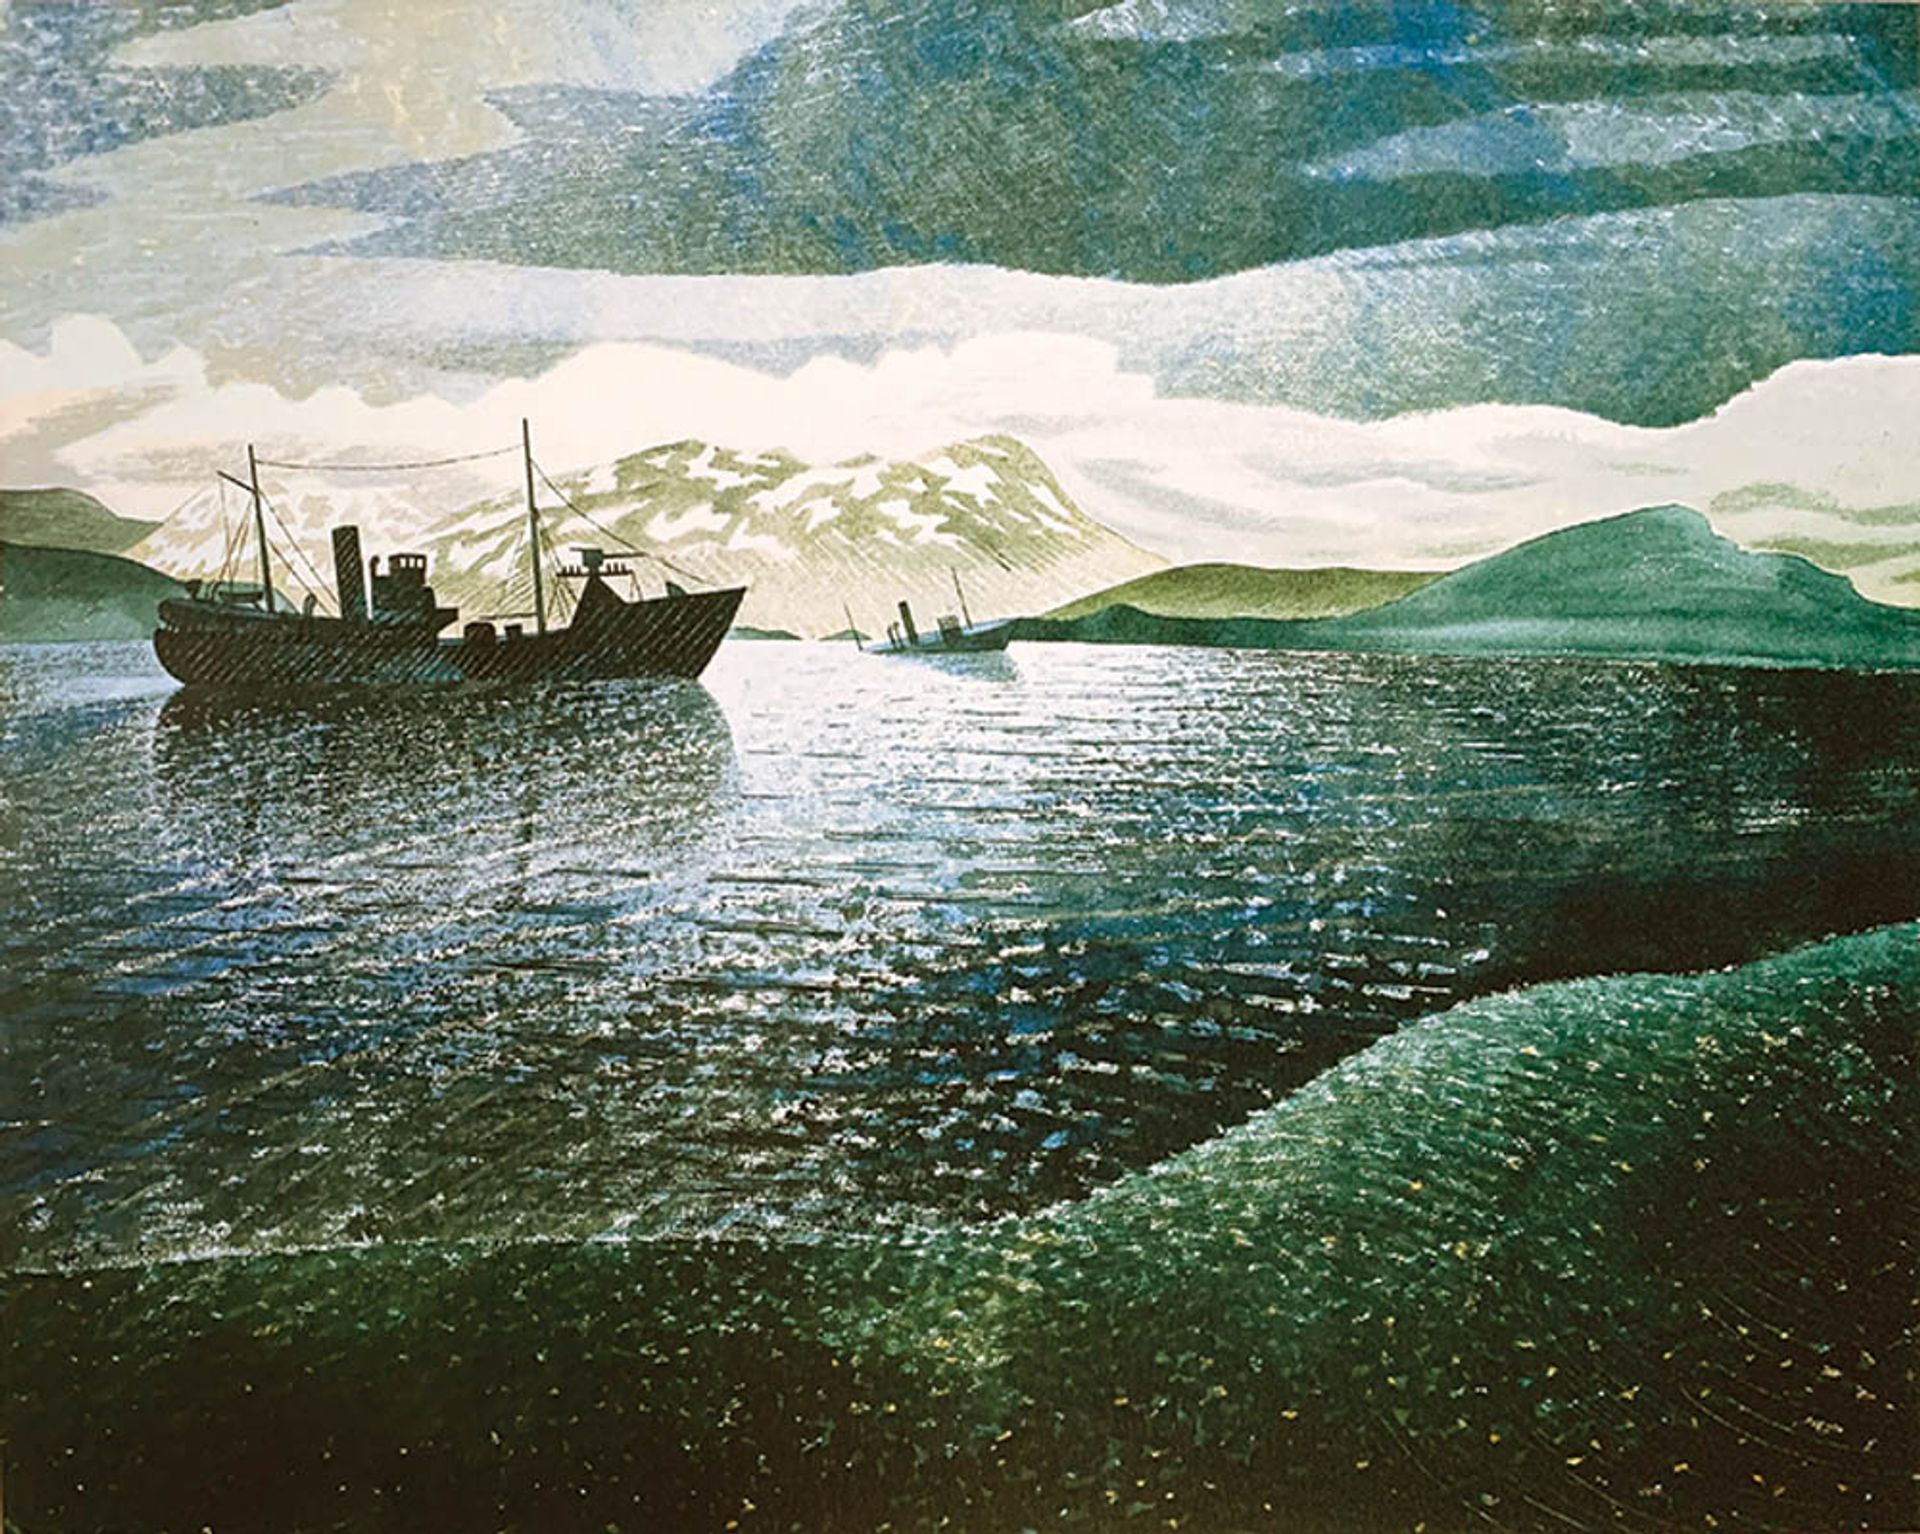 ‘When you are so drawn into conditions, you forget the danger’: HMS Glorious in the Arctic (1940), by the British war artist Eric Ravilious. He died in September 1942 when his plane disappeared off the coast of Iceland © www.foxtrotfilms.com